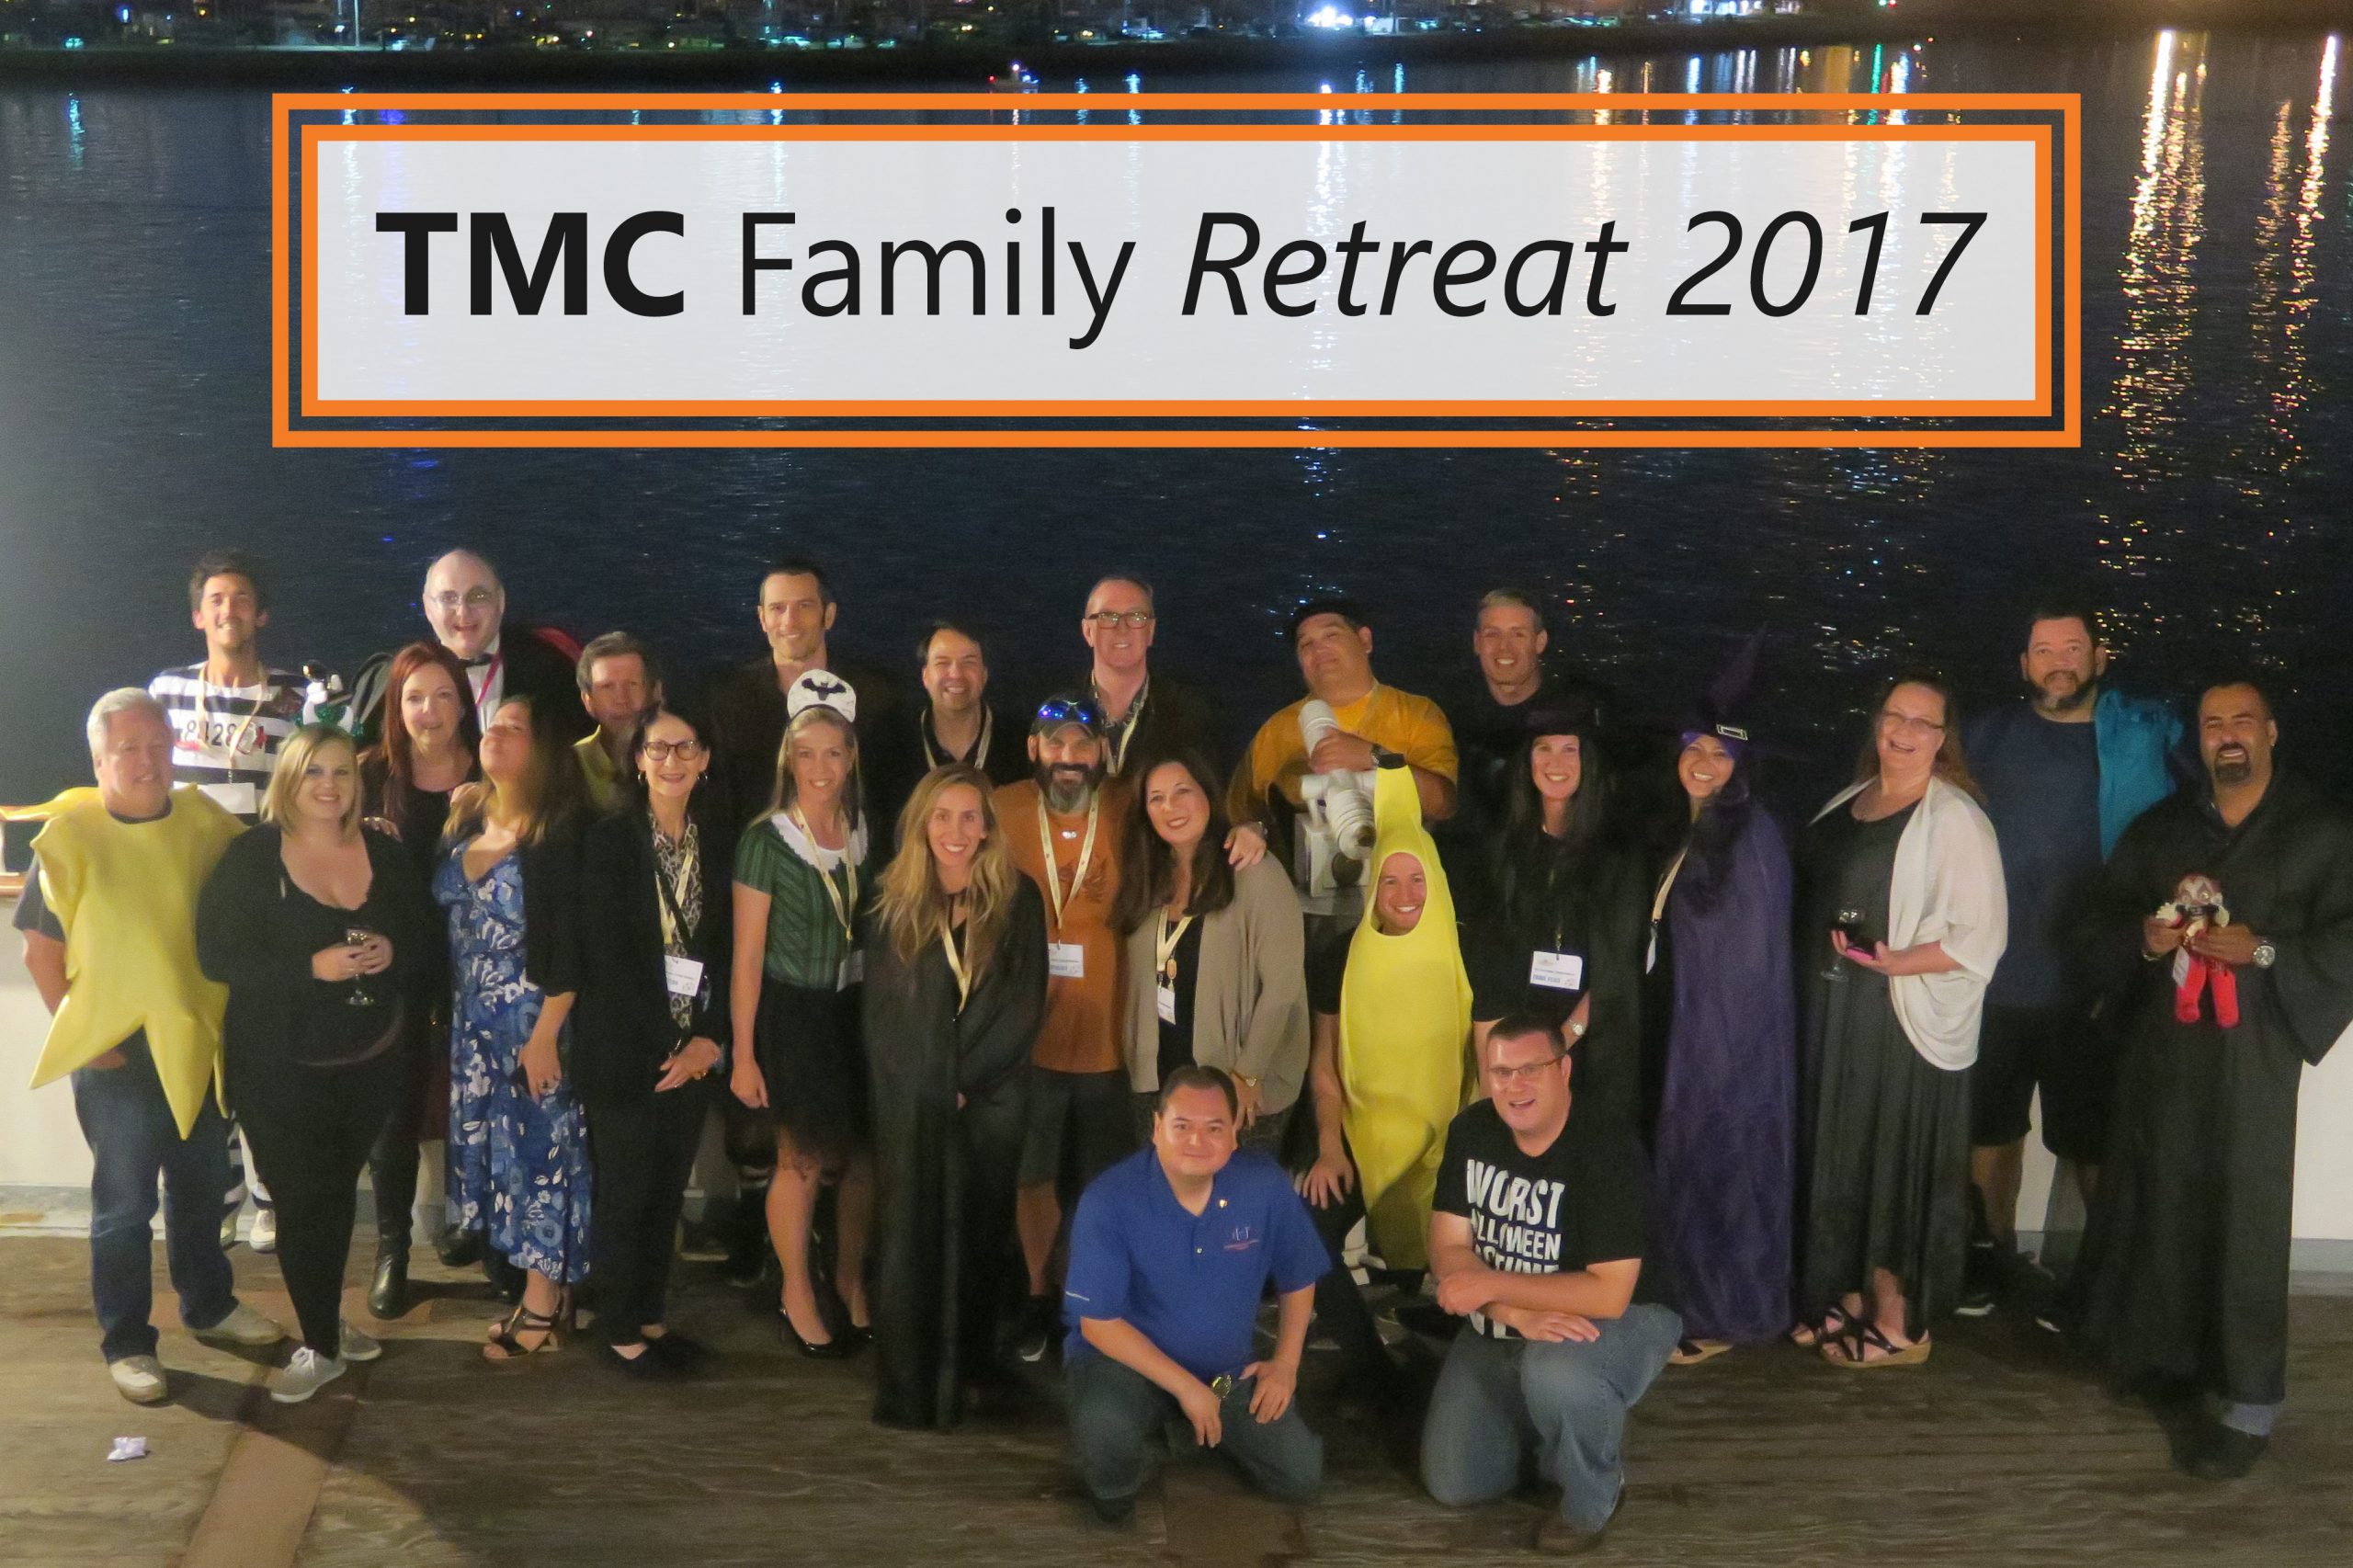 TMC-family-retreat-2017-group-picture.jpg